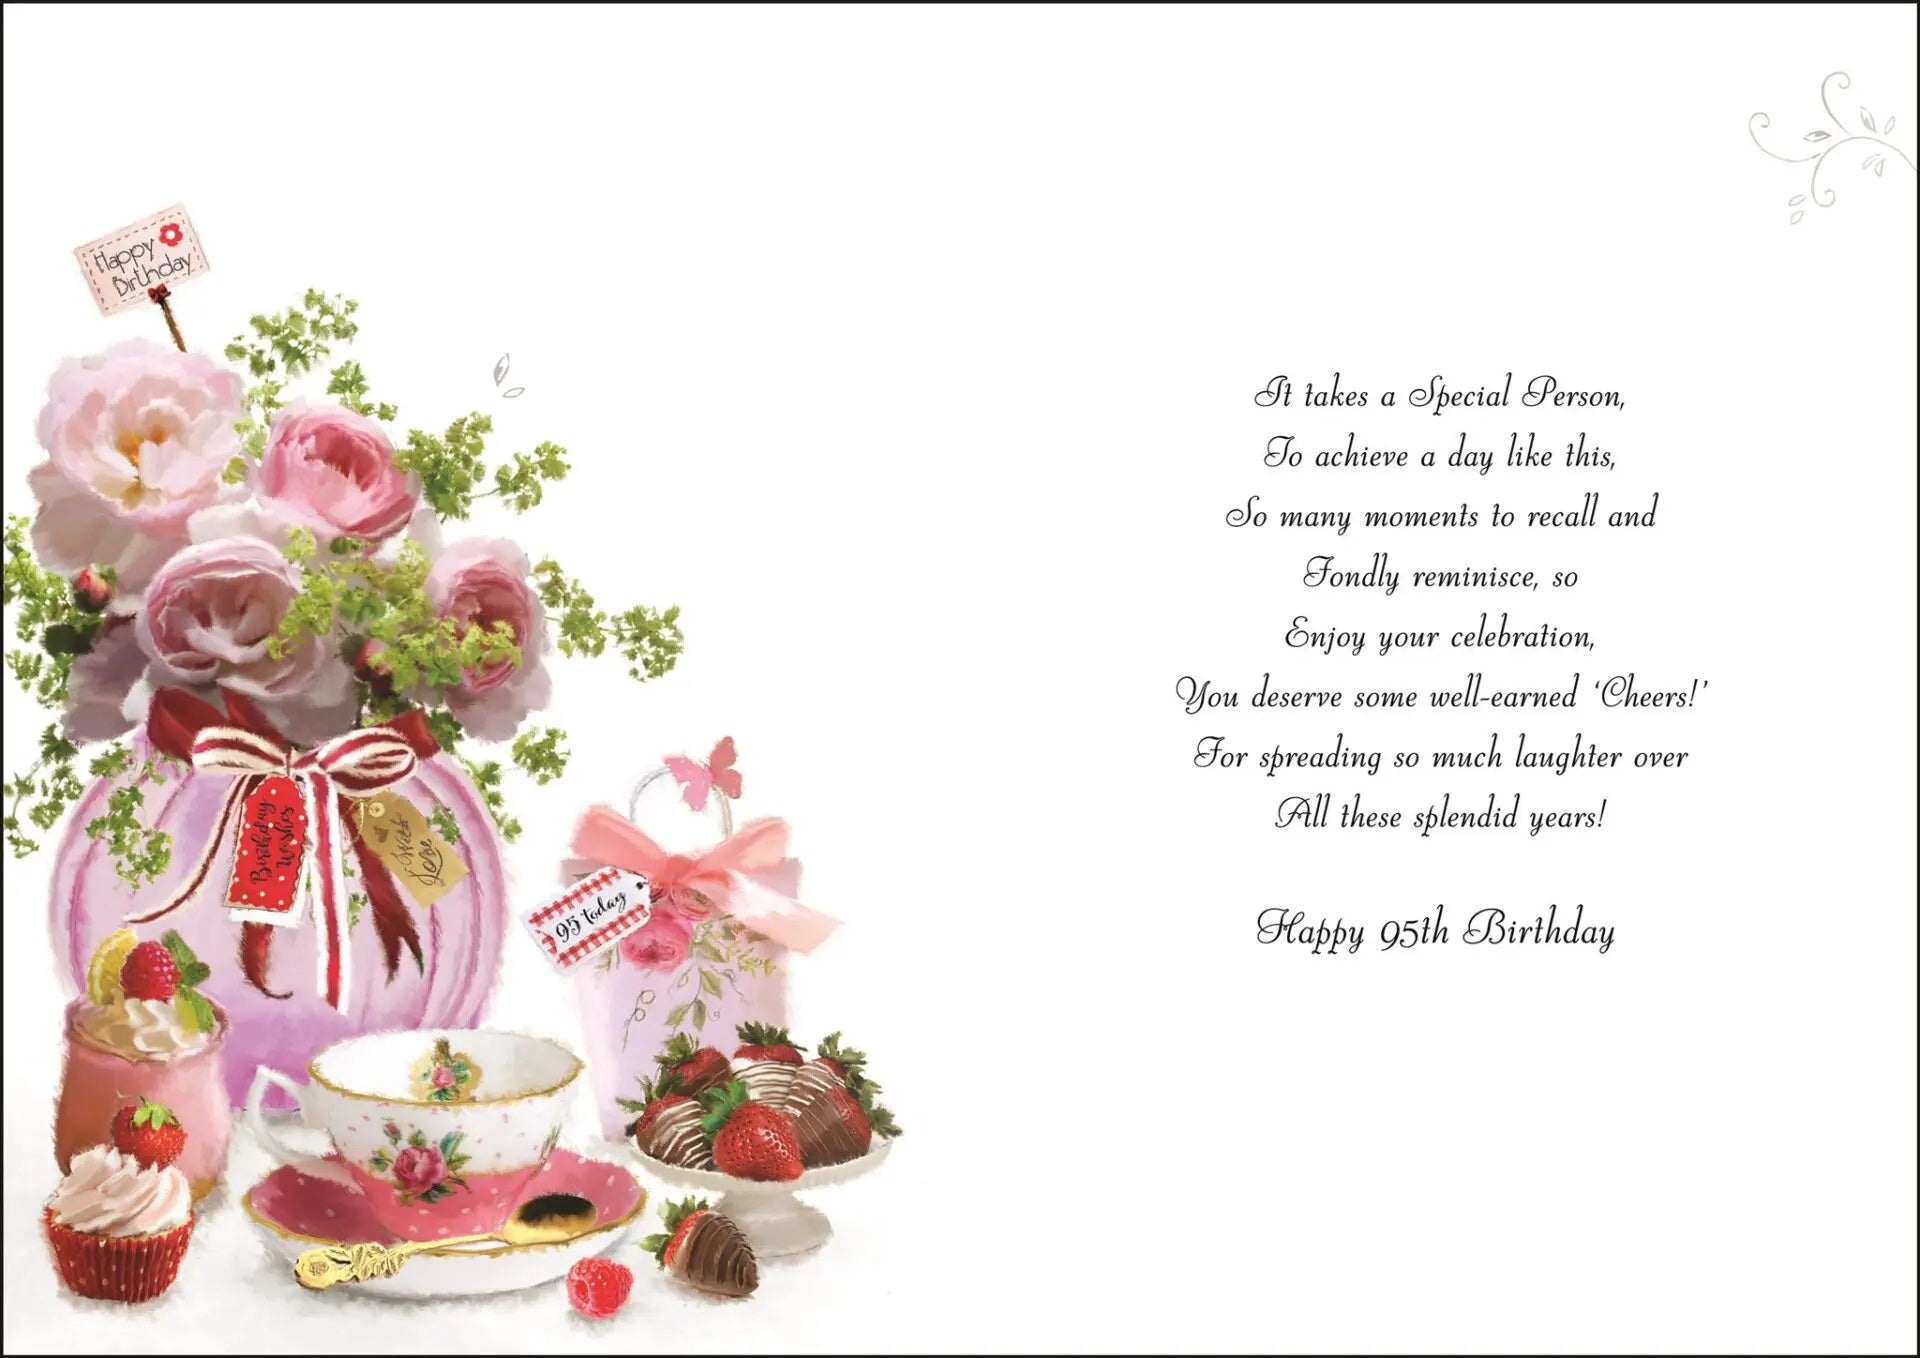 95th Birthday Card - Tea Time With Posh Cup Cakes And Flowers